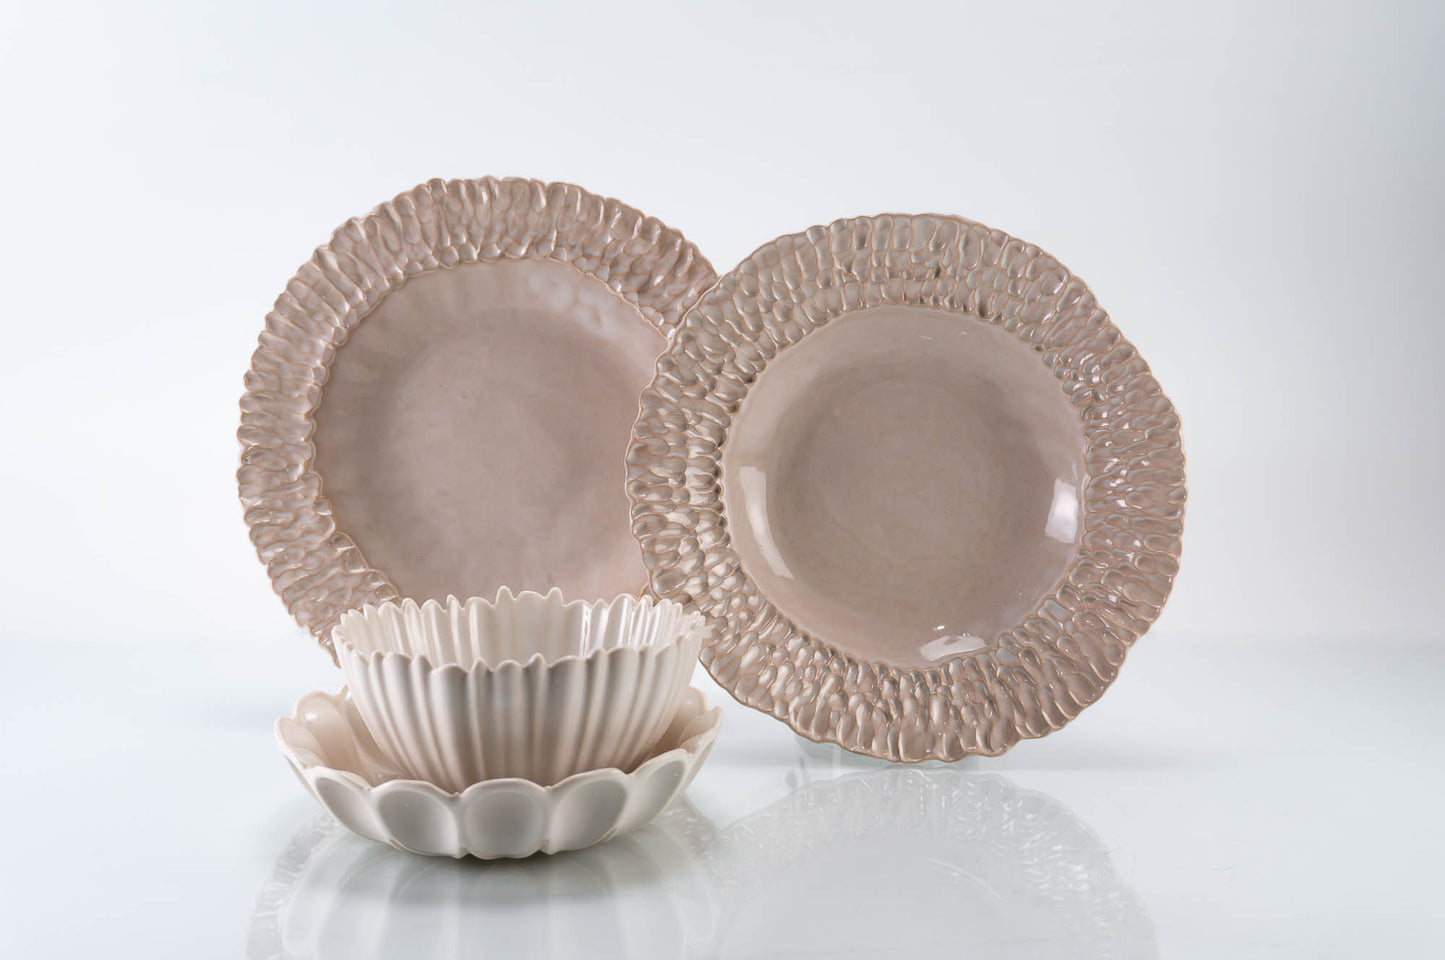 Medium Rimmed Plate 4-Piece Place Setting | Table Setting